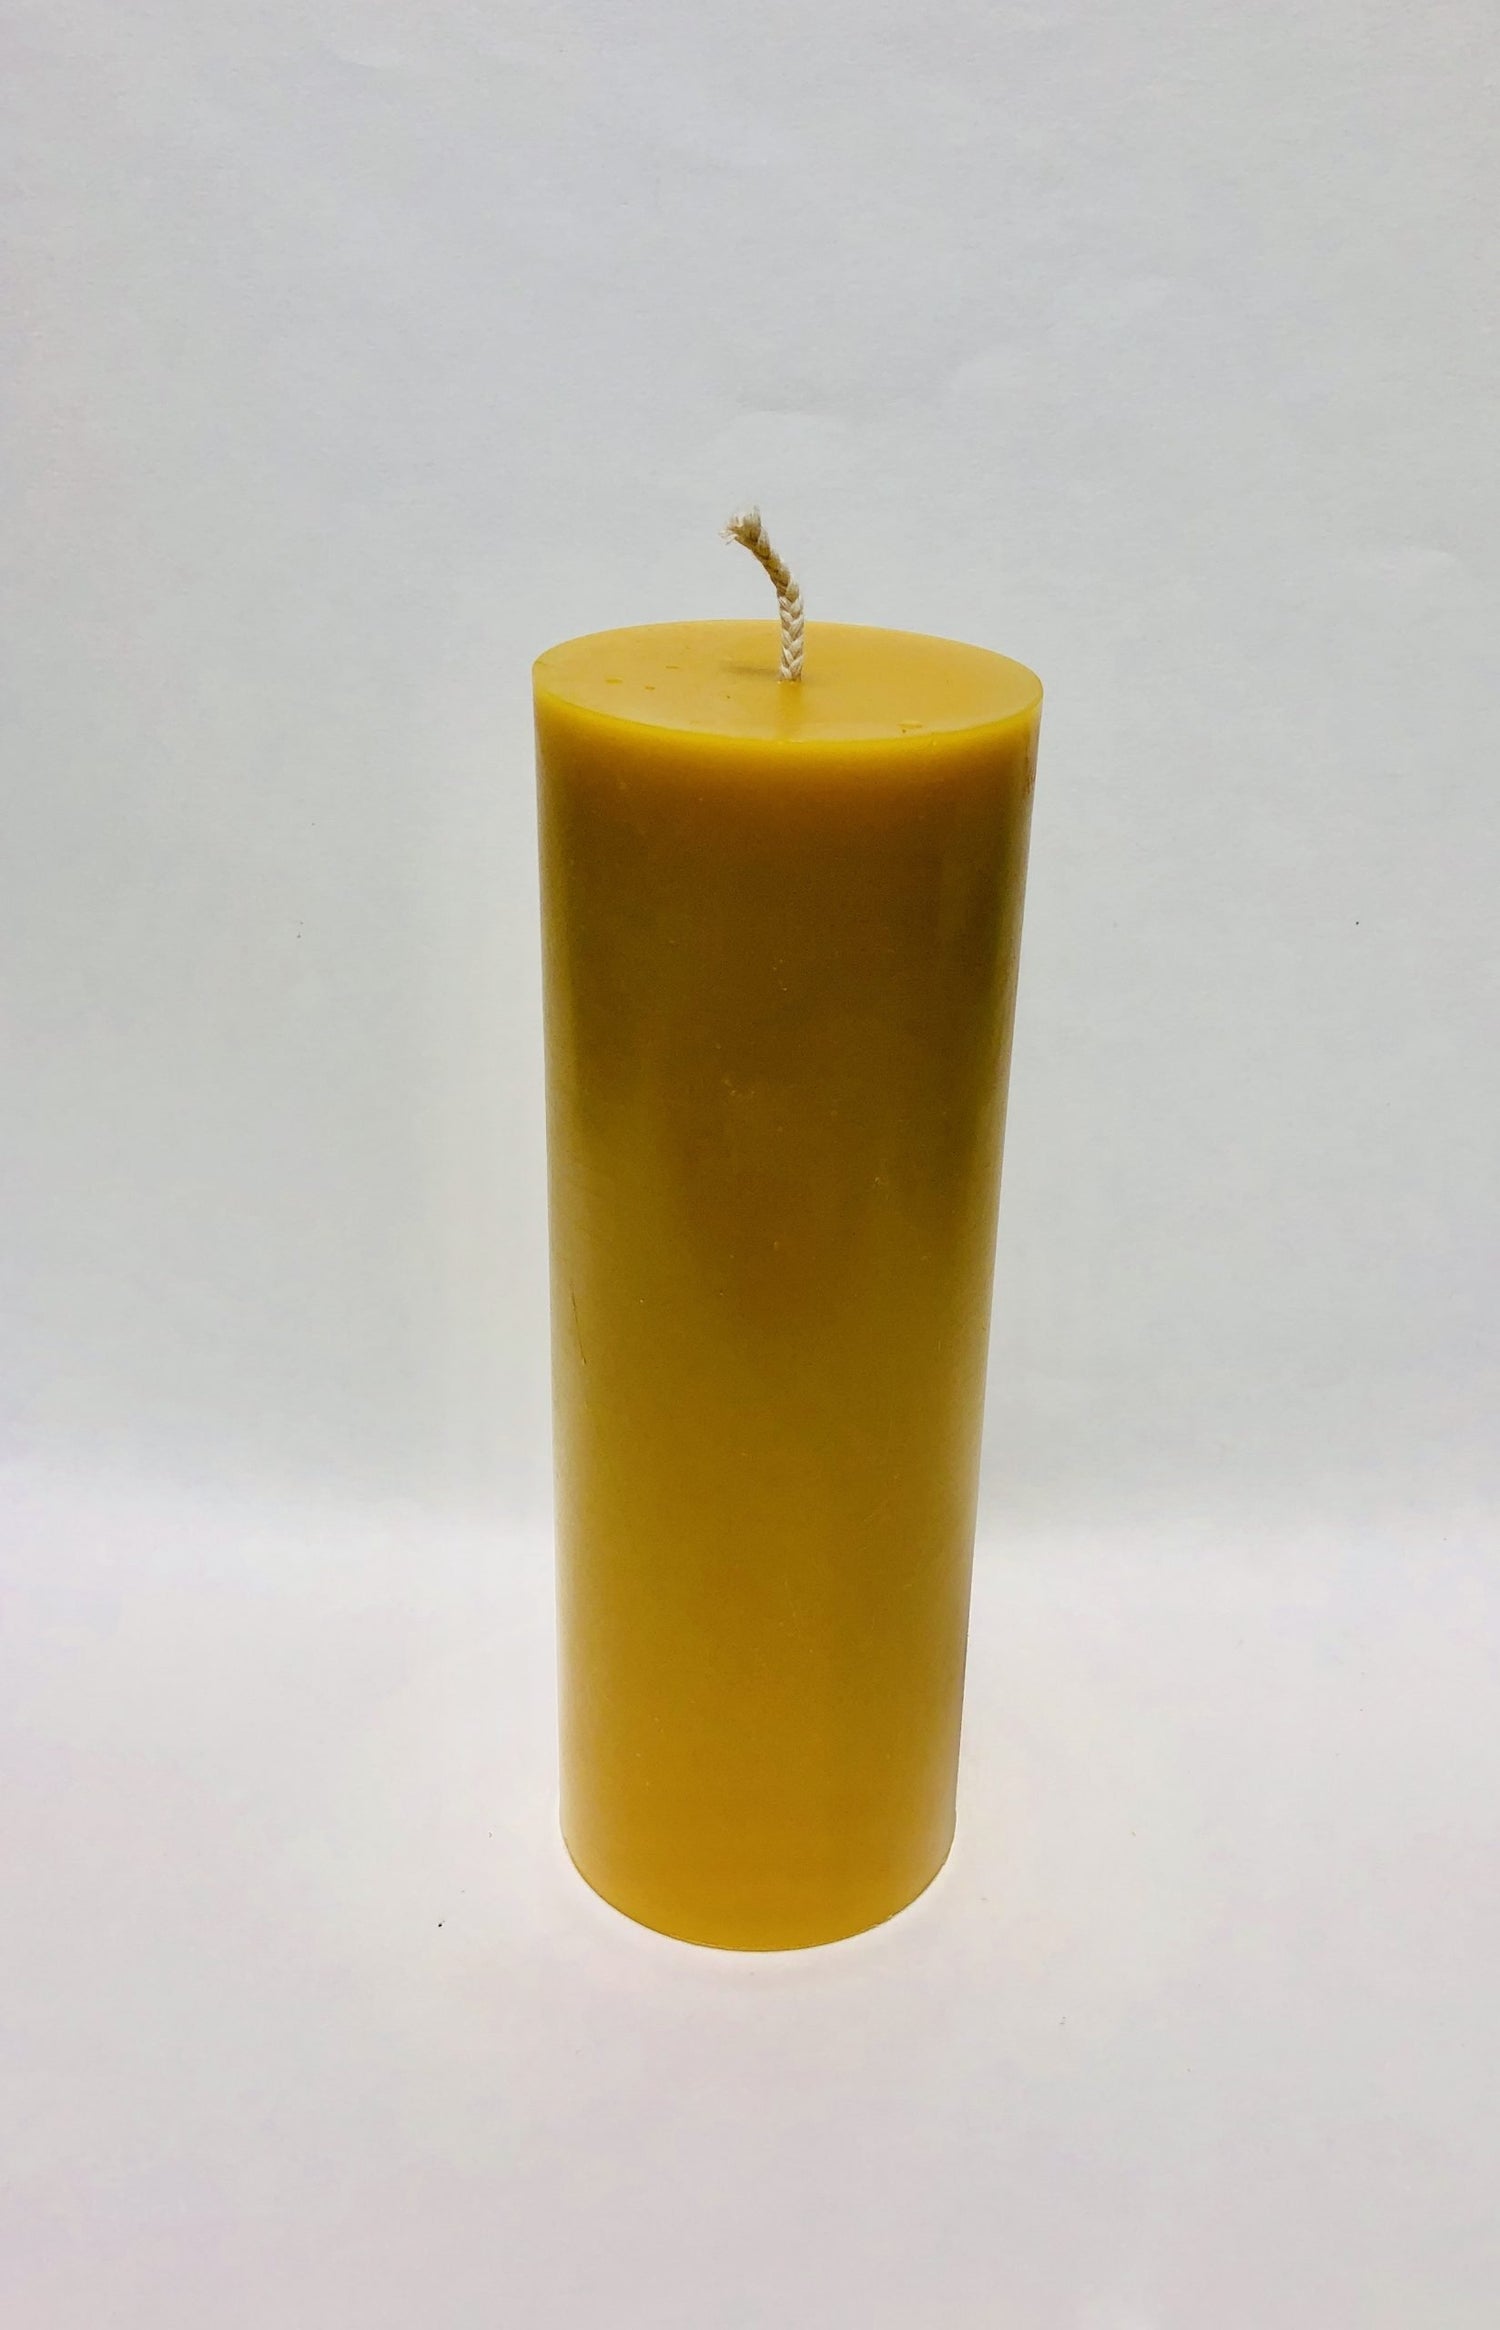 Square Braid 2/0 Small Cotton Candle Wicks, Cotton Wick, Candle Making  Supplies, Beeswax Candle Wick, Candle Wicking, Candle Wick in Bulk